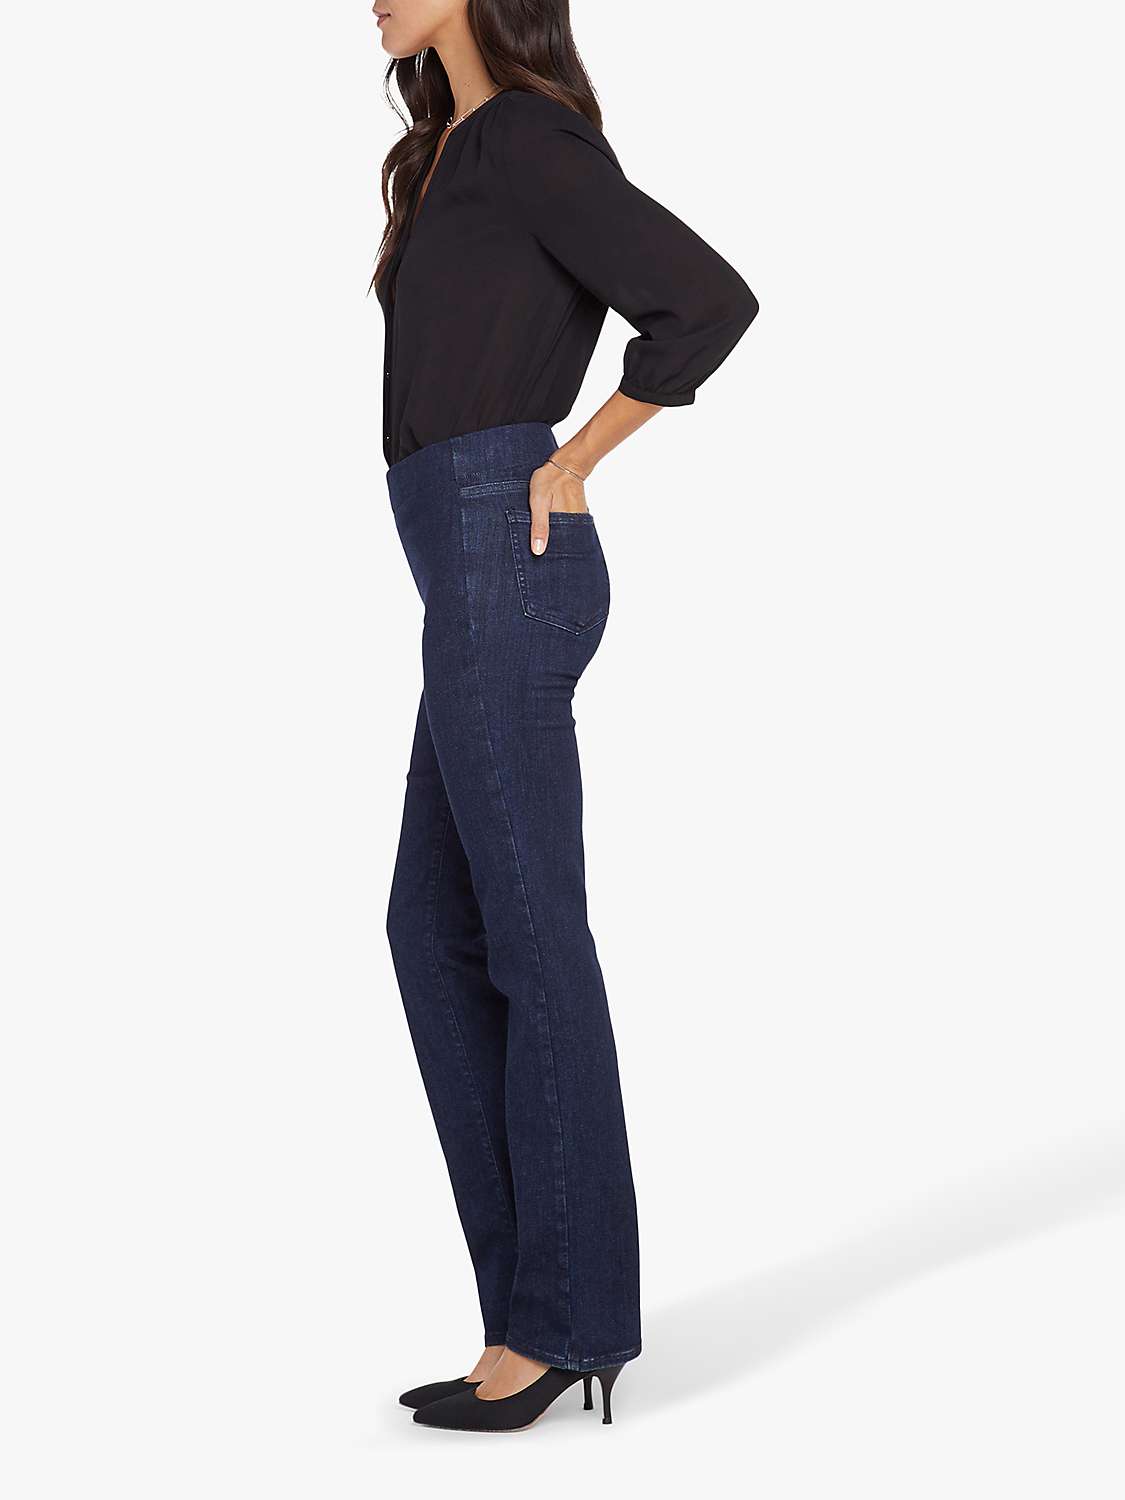 Buy NYDJ Marilyn Straight Pull-On Jeans in SpanSpring™ Denim, Langley Online at johnlewis.com